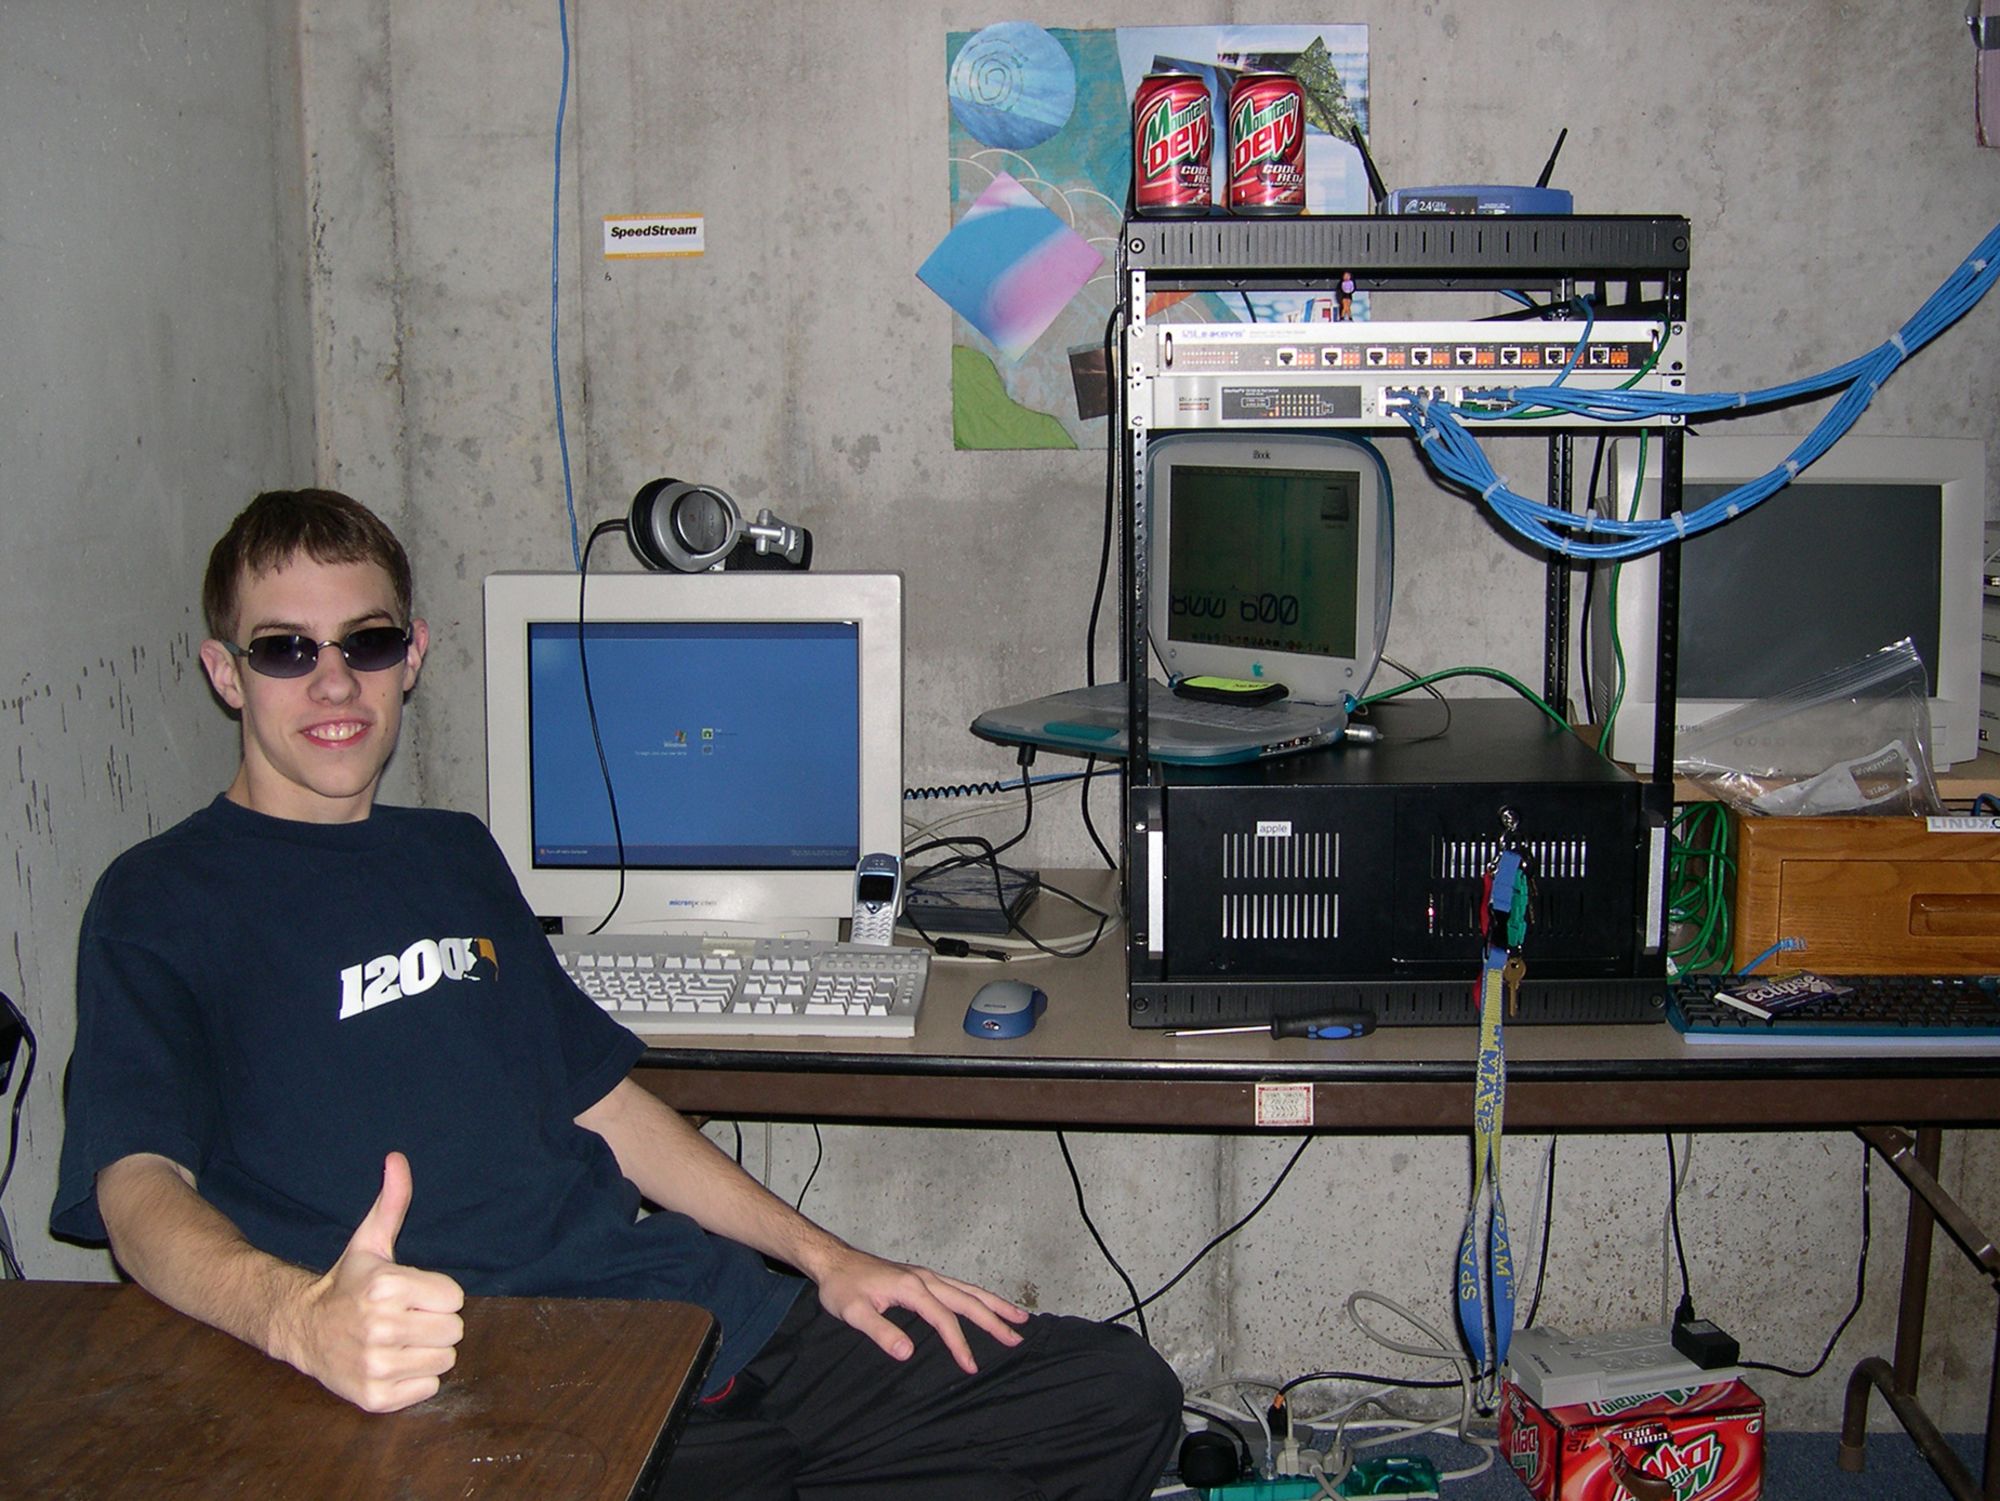 An array of electronics, cables, soda cans — and shades; the quintessential LAN party set-up as pictured in a gamer's basement space in Lee's Summit, Montana in 2002.